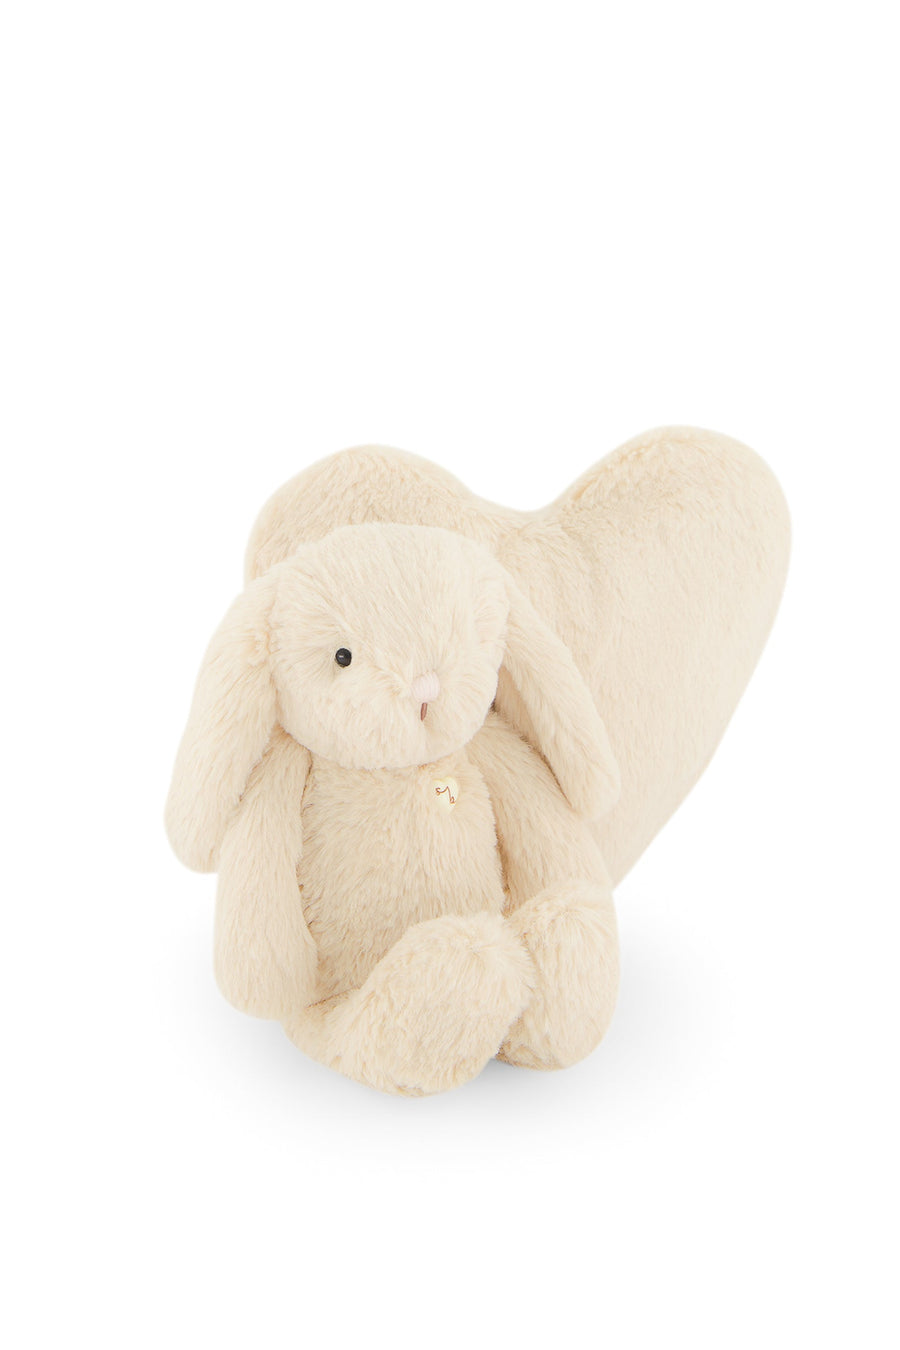 Snuggle Bunnies - Valentines Day - Brulee Childrens Toy from Jamie Kay NZ